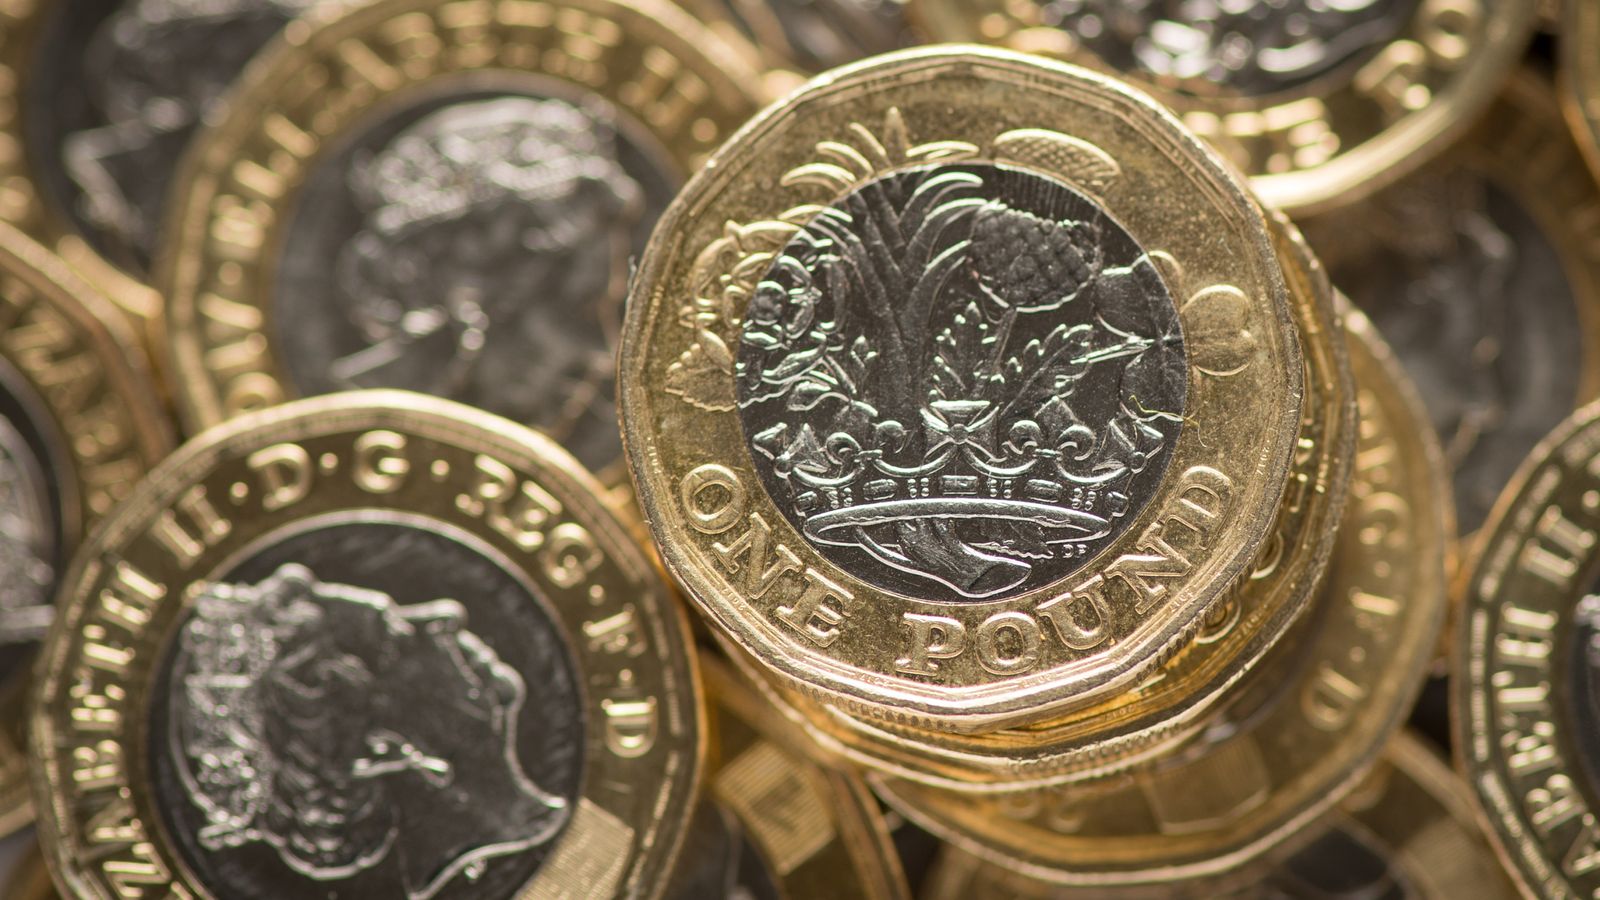 National living wage increasing to £11.44 per hour from April - a £1.02 rise